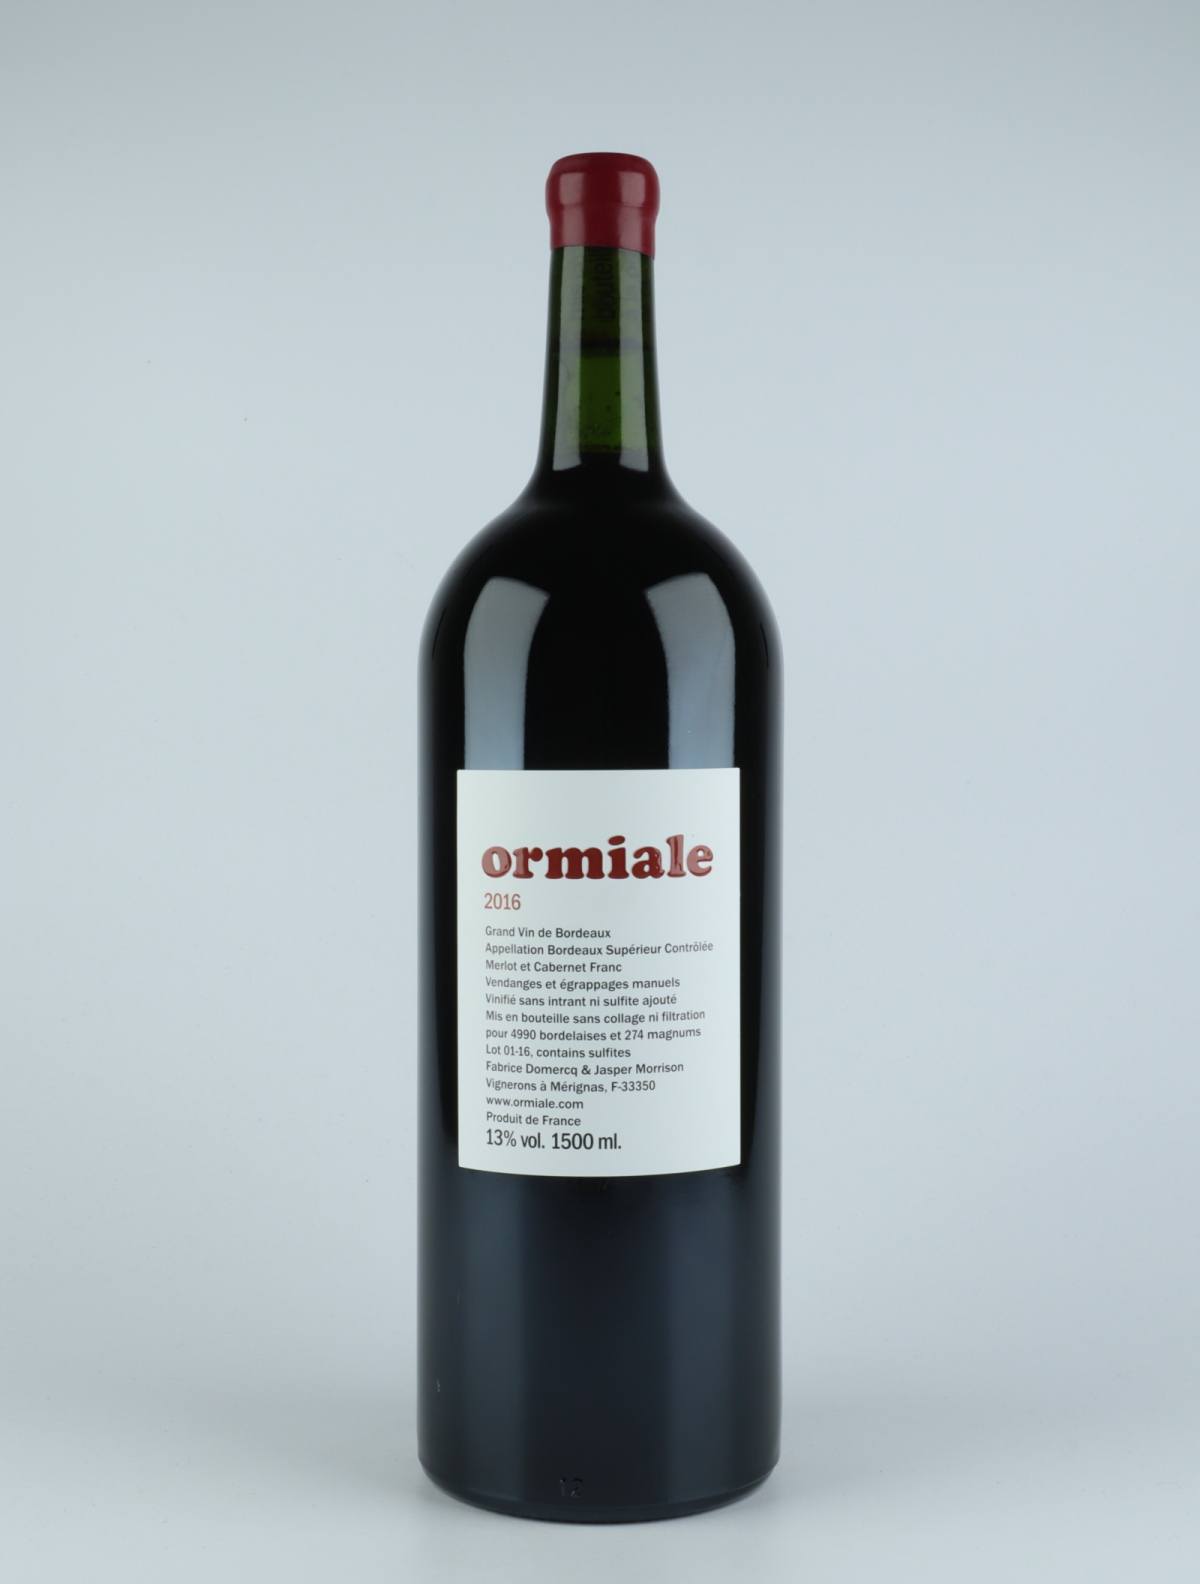 A bottle 2016 Ormiale Red wine from Ormiale, Bordeaux in France